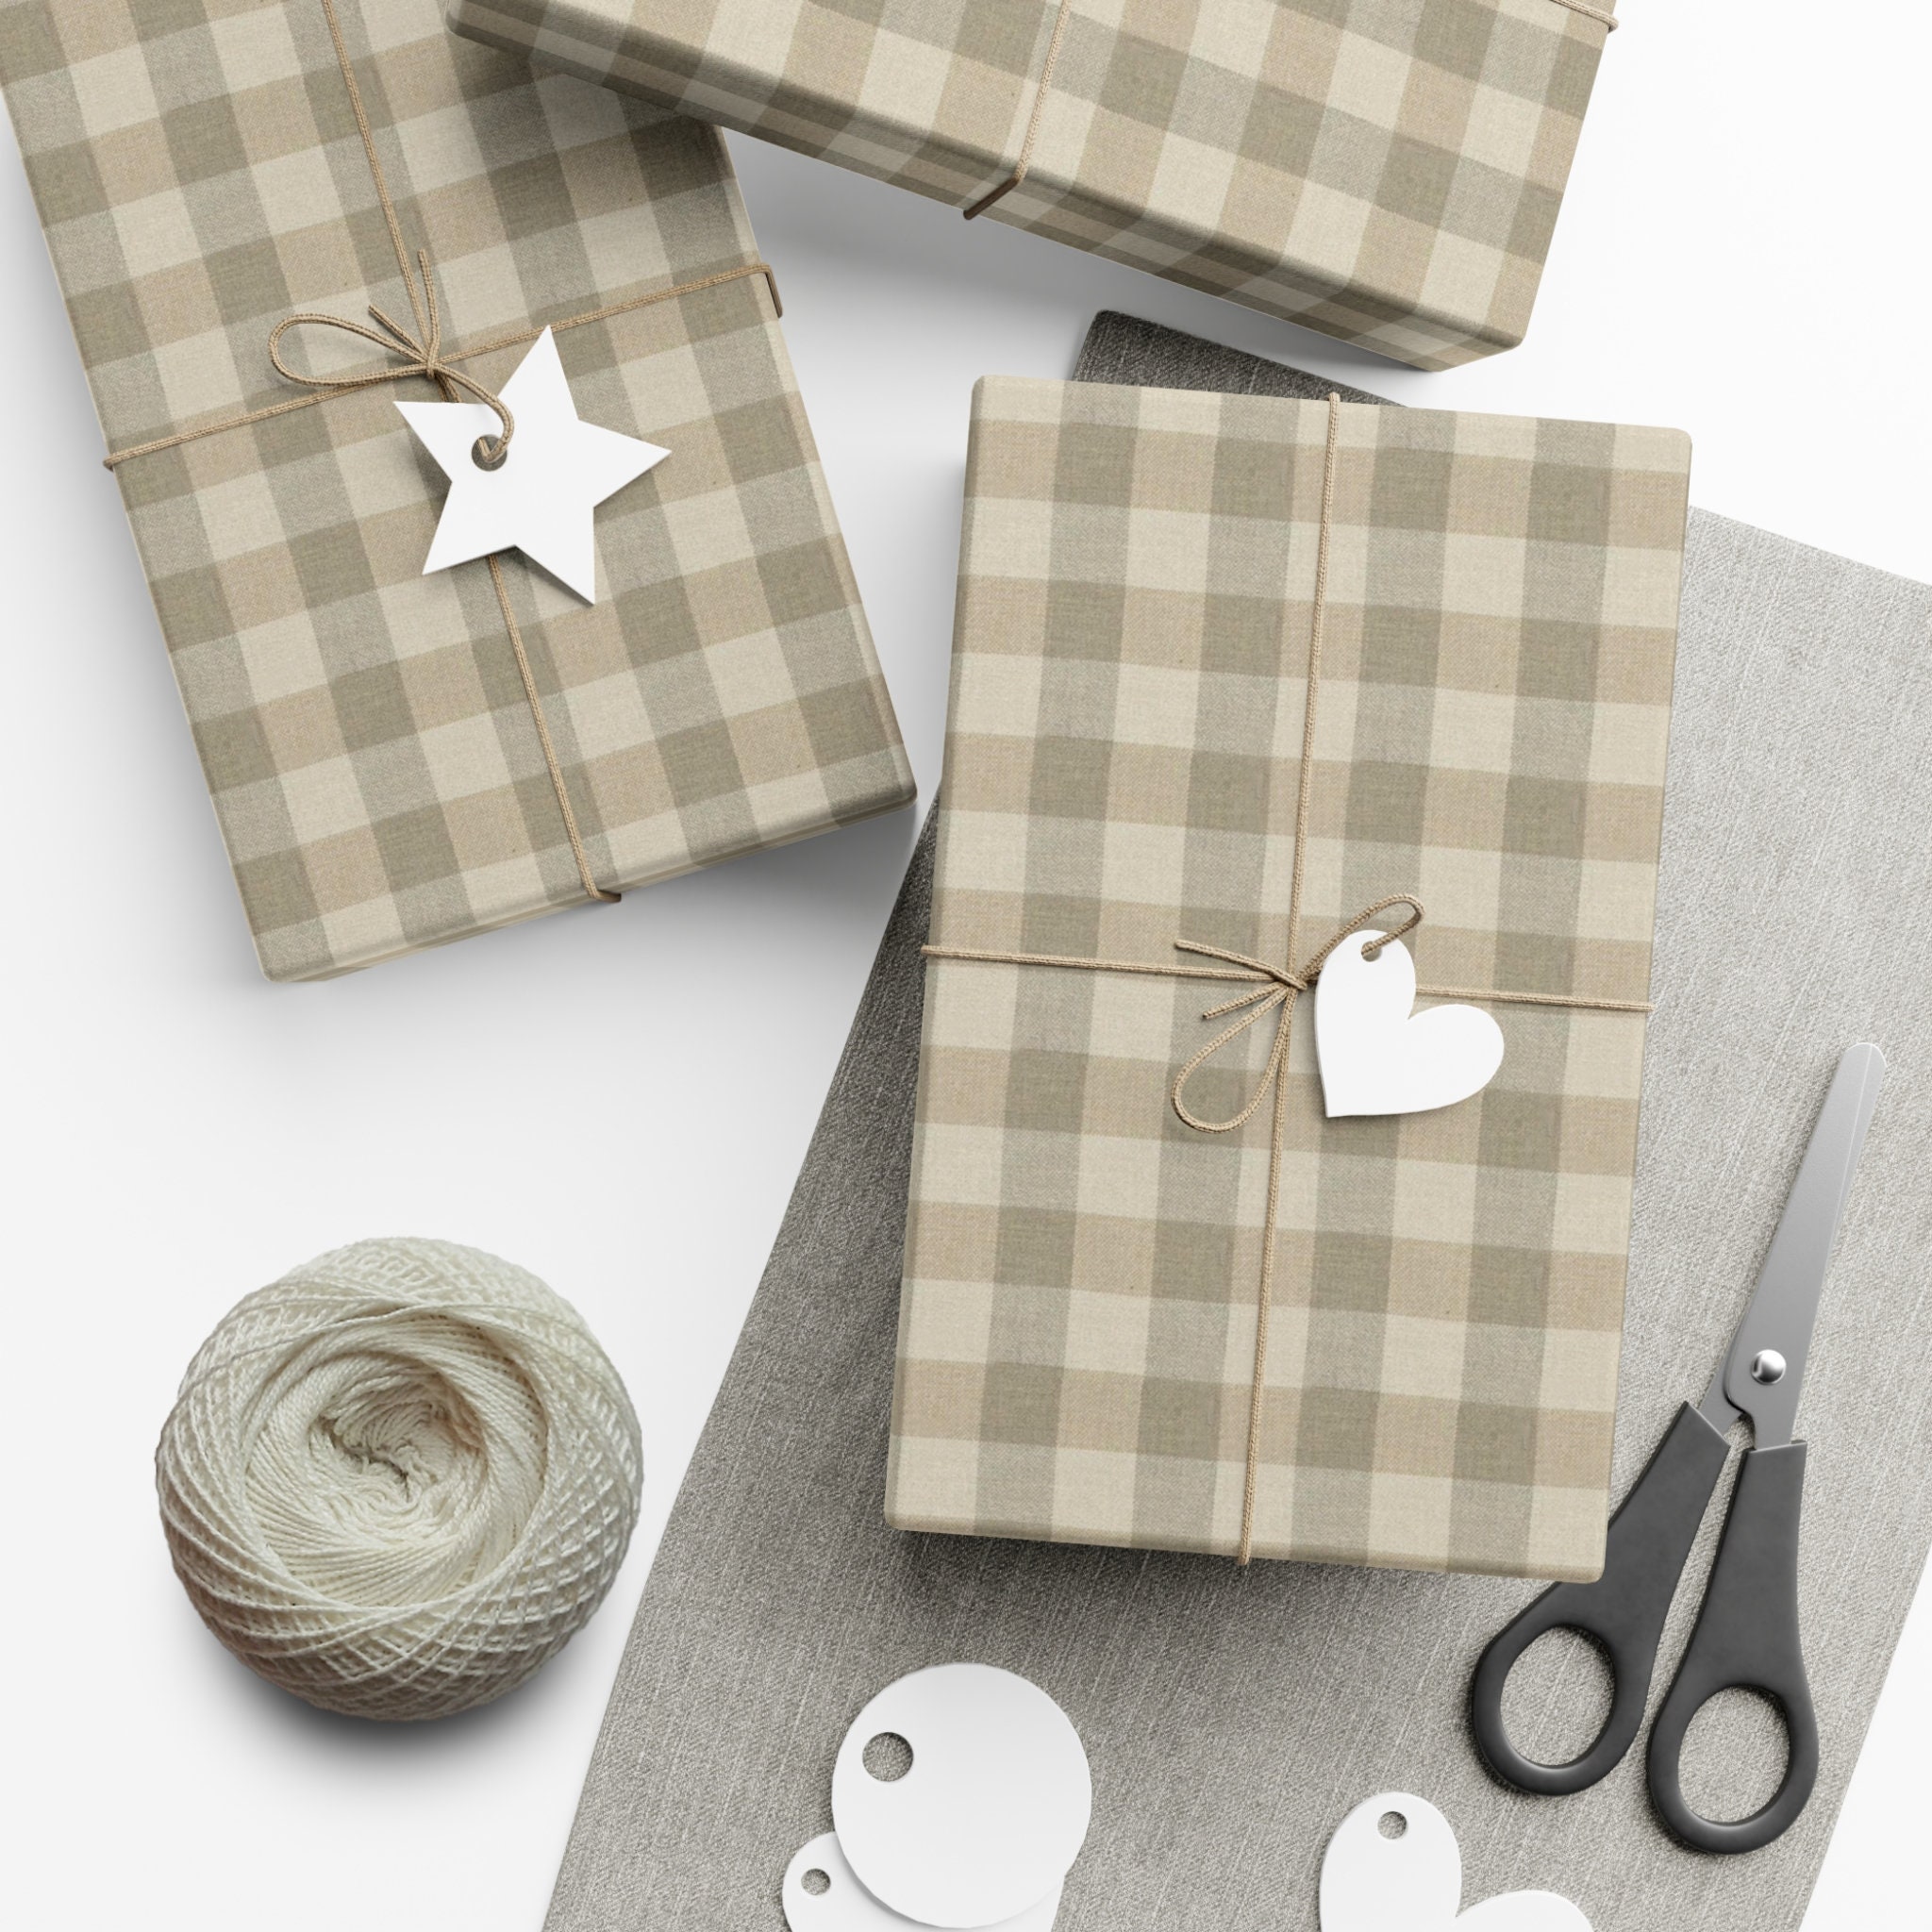 Black Gift Boxes Wrapping Paper 